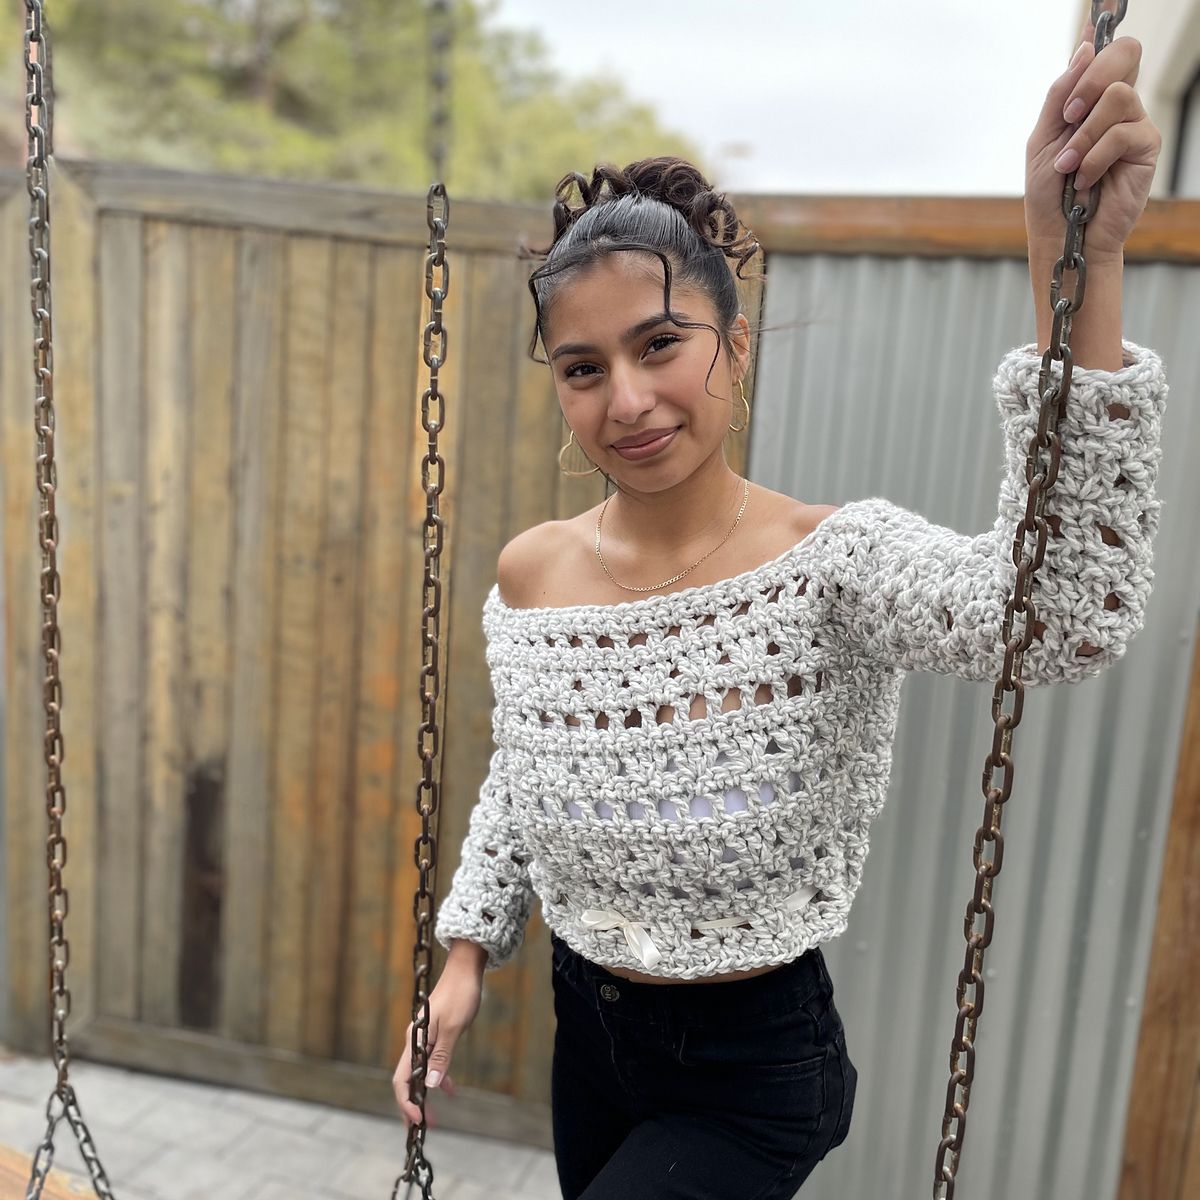 a woman wearing a lace crocheted sweater in a chunky white yarn stands with her hands on swing chains, smiling directly at the camera